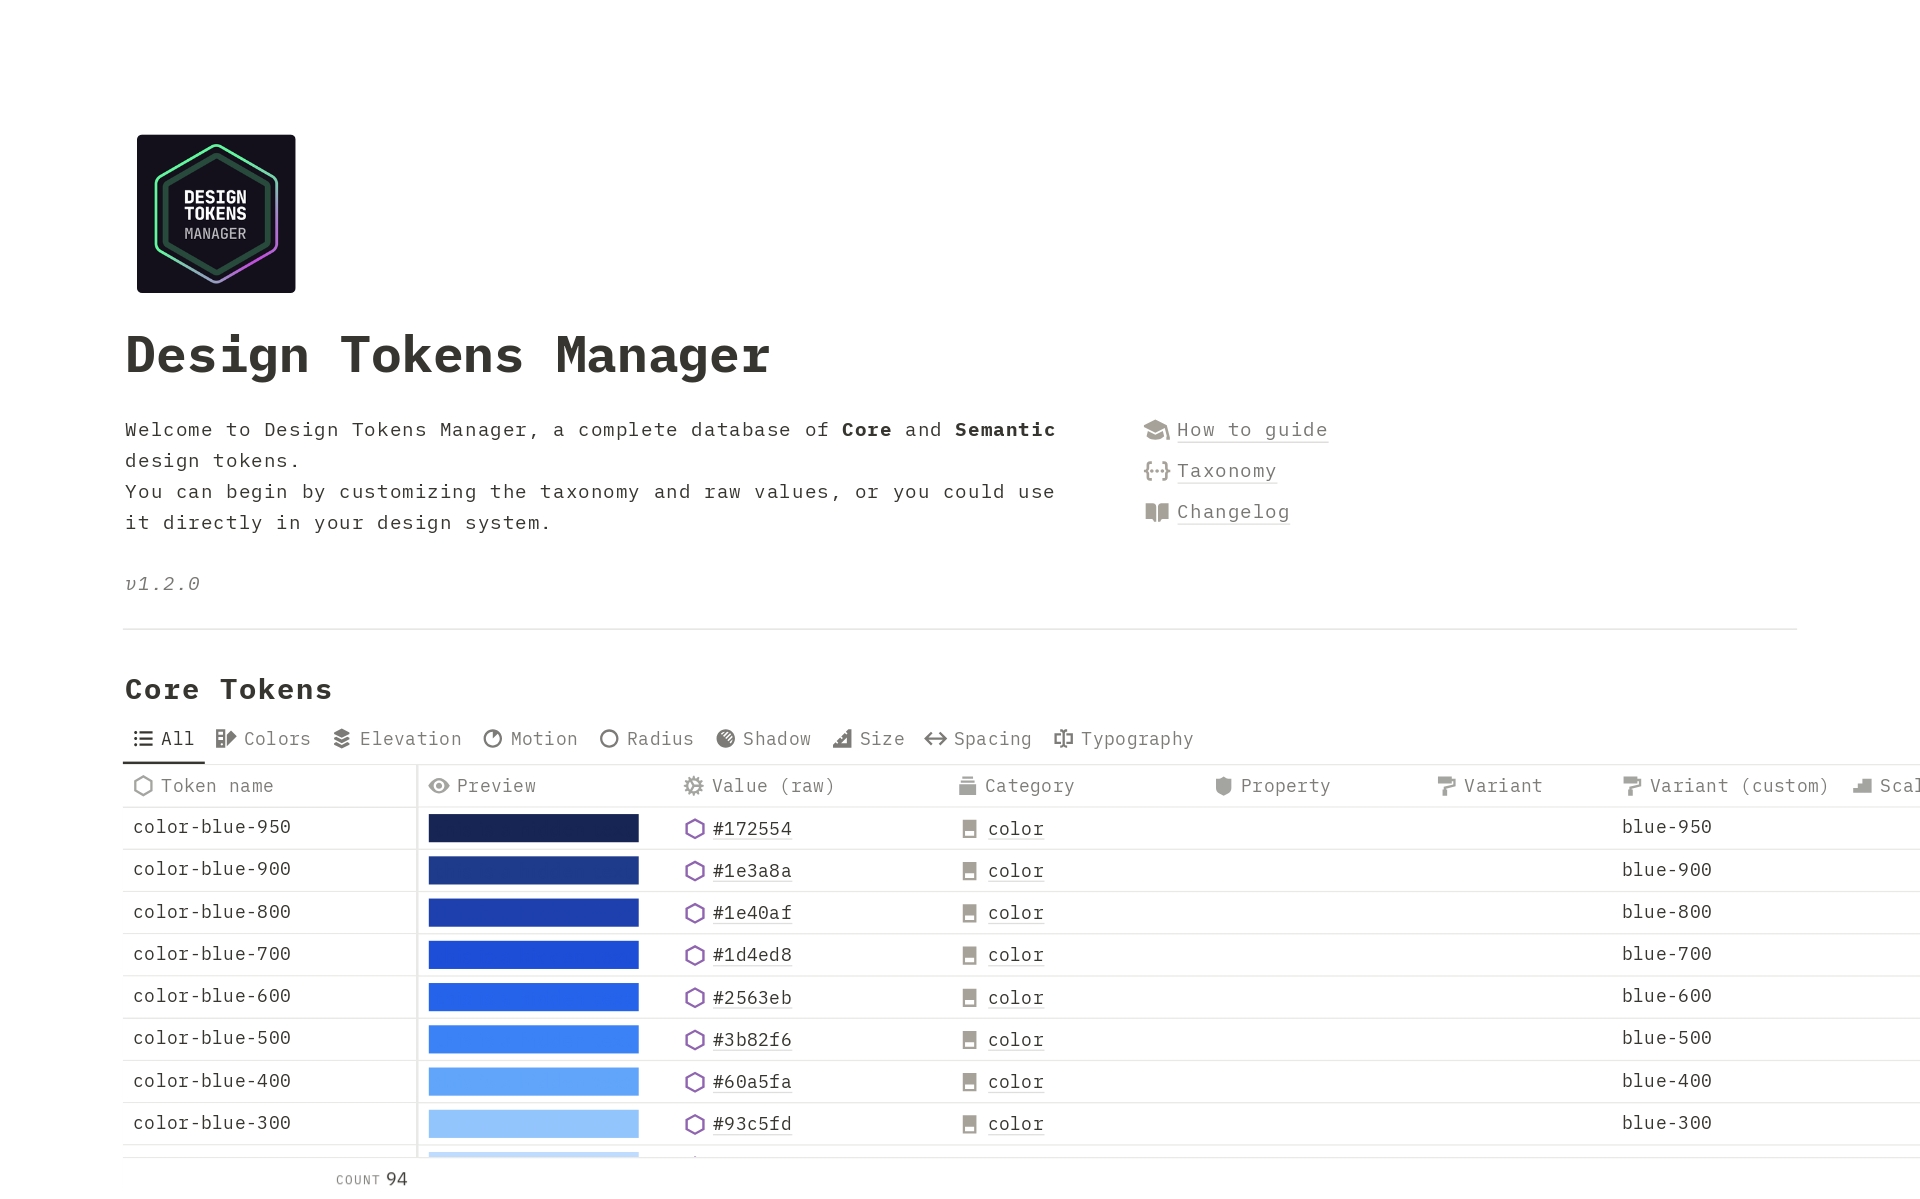 Design Tokens Manager is a powerful tool that helps streamline the management of design tokens.